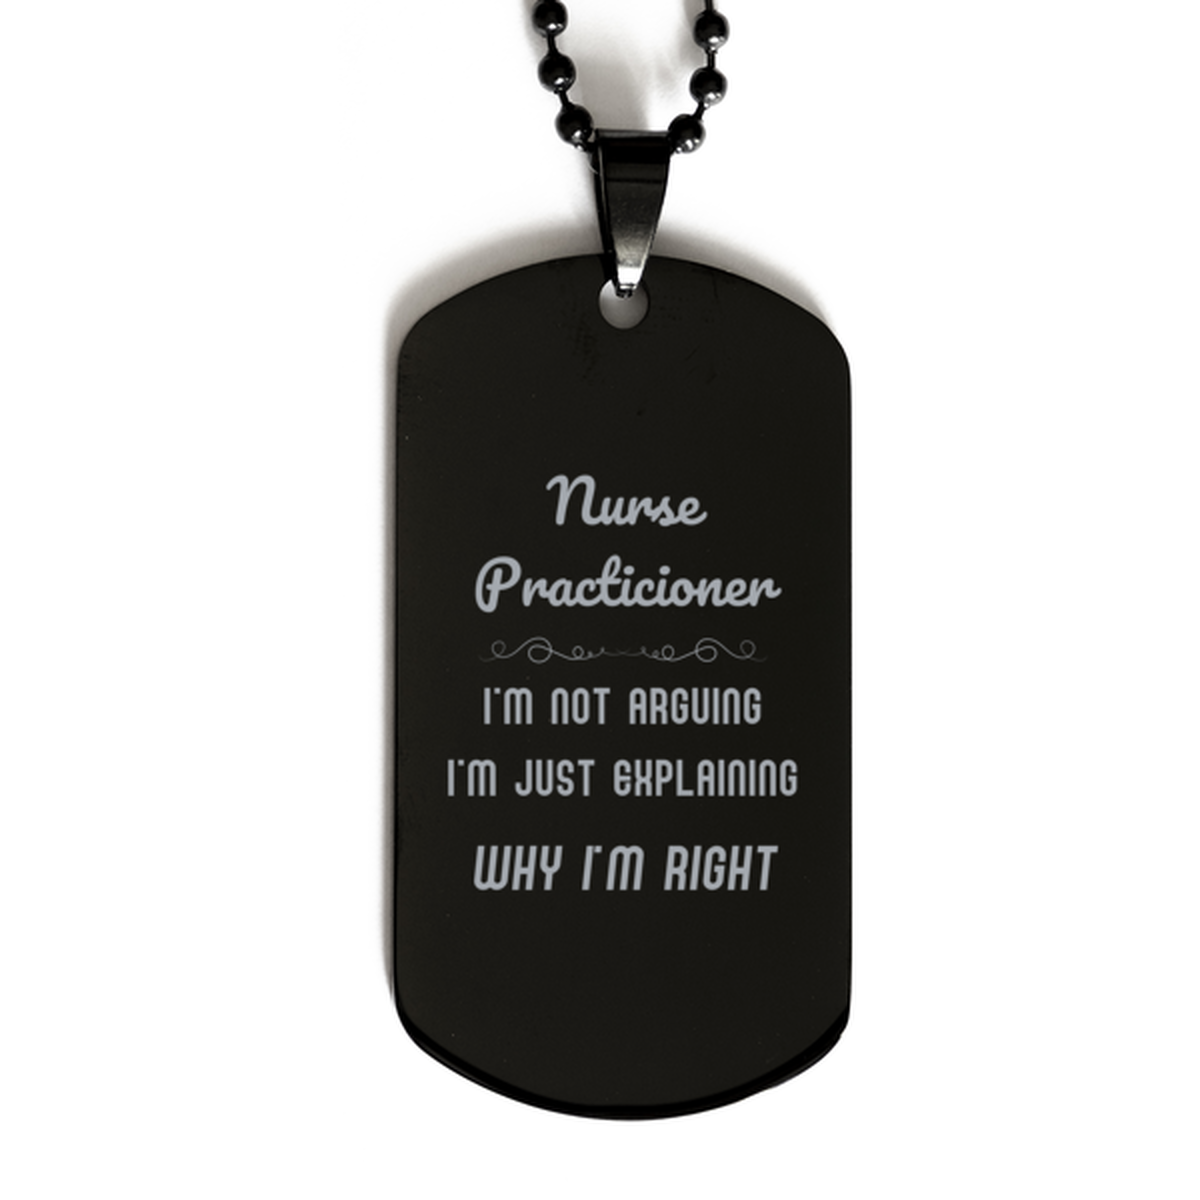 Nurse Practicioner I'm not Arguing. I'm Just Explaining Why I'm RIGHT Black Dog Tag, Funny Saying Quote Nurse Practicioner Gifts For Nurse Practicioner Graduation Birthday Christmas Gifts for Men Women Coworker